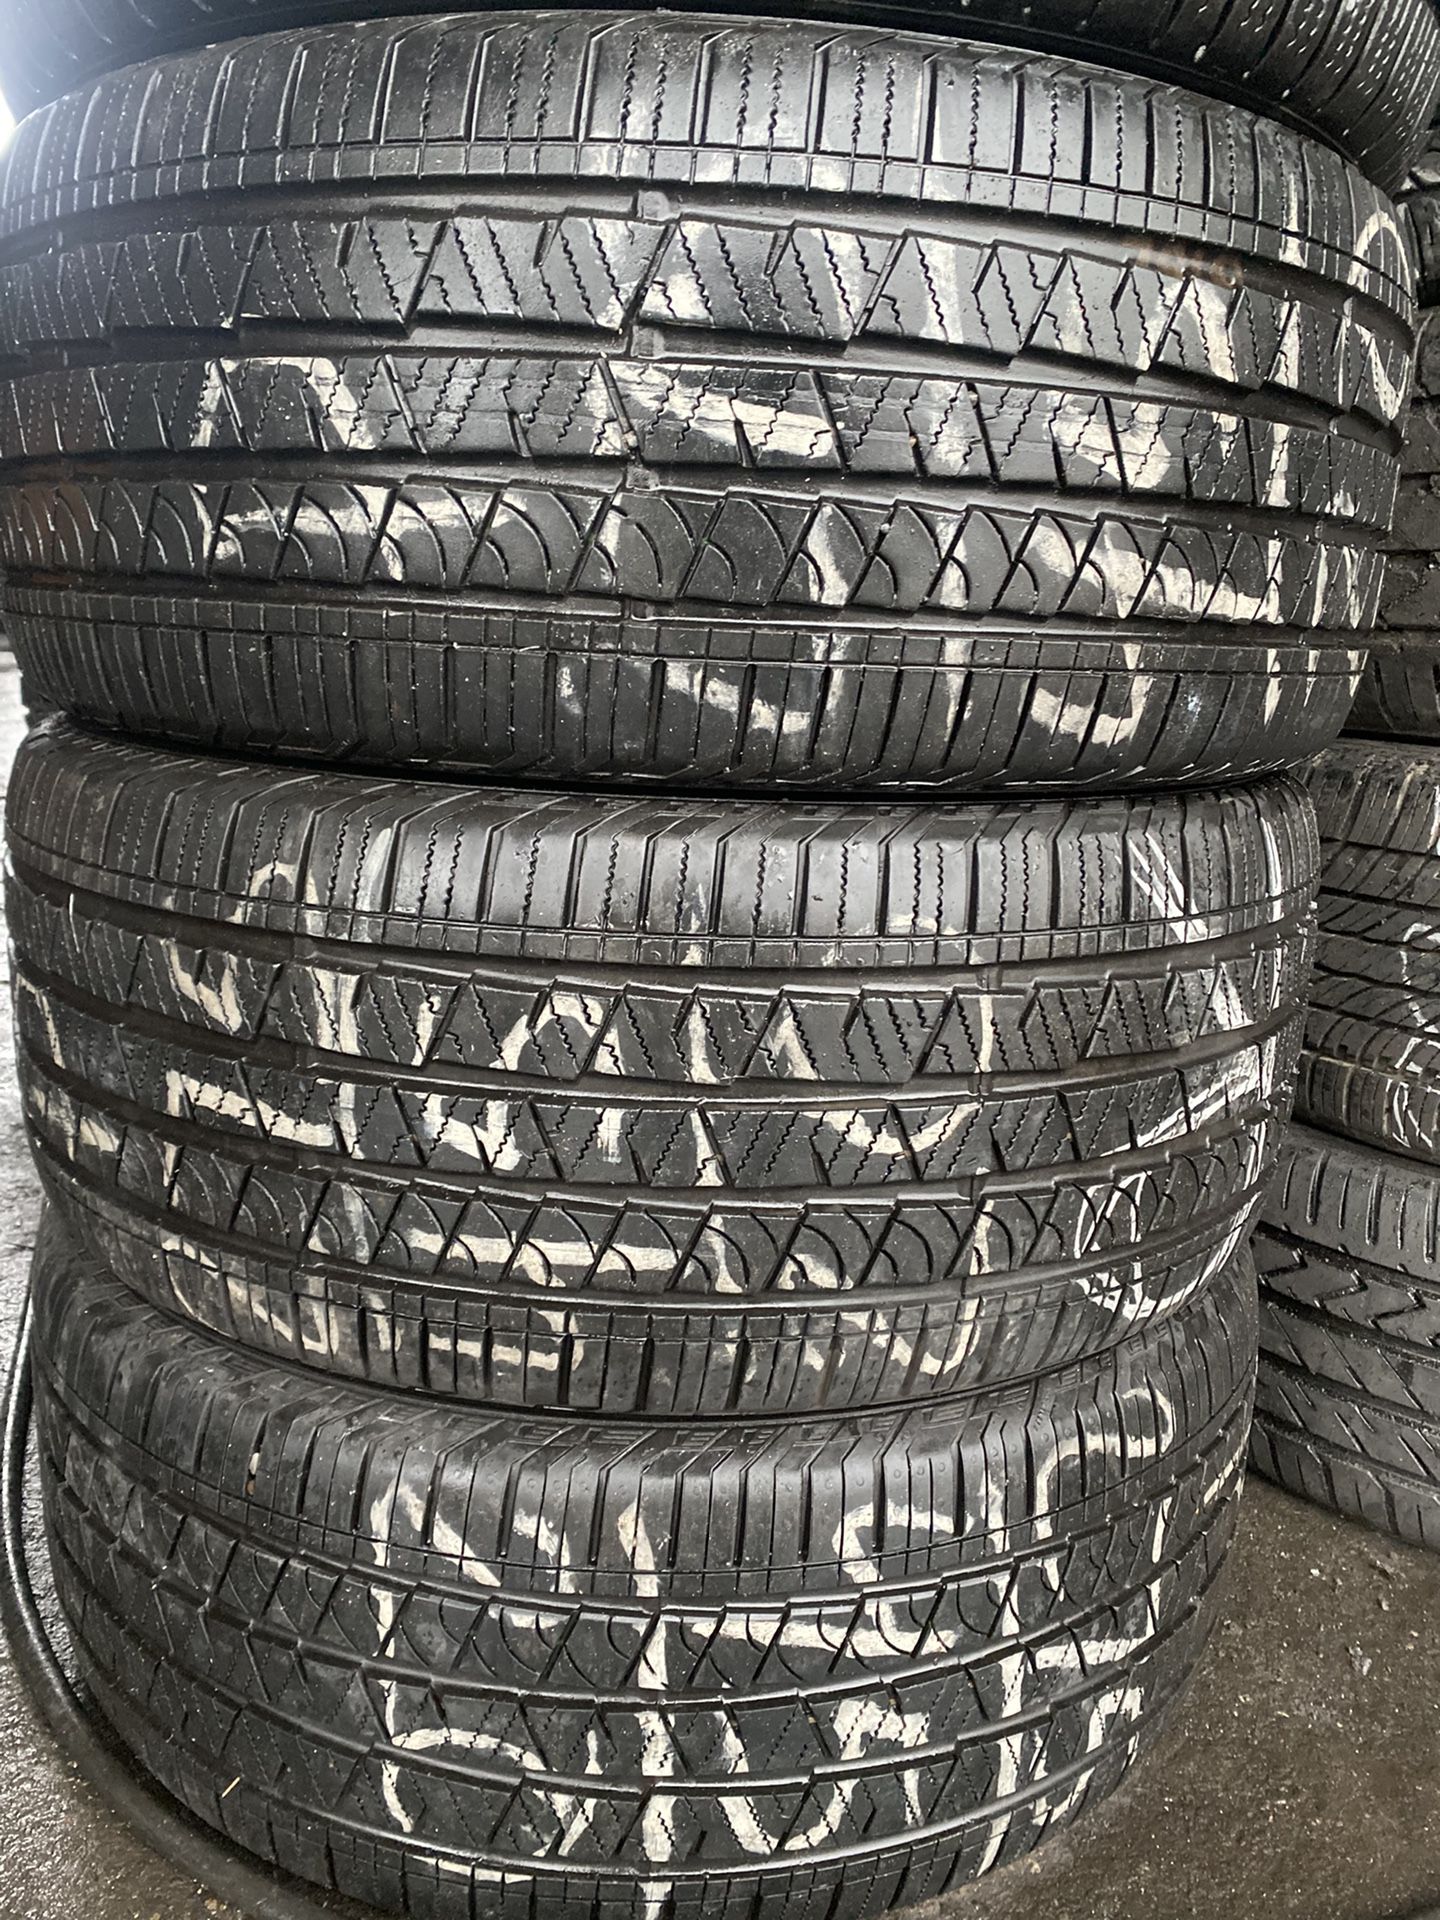 275/45R20 Continental Tires Like New